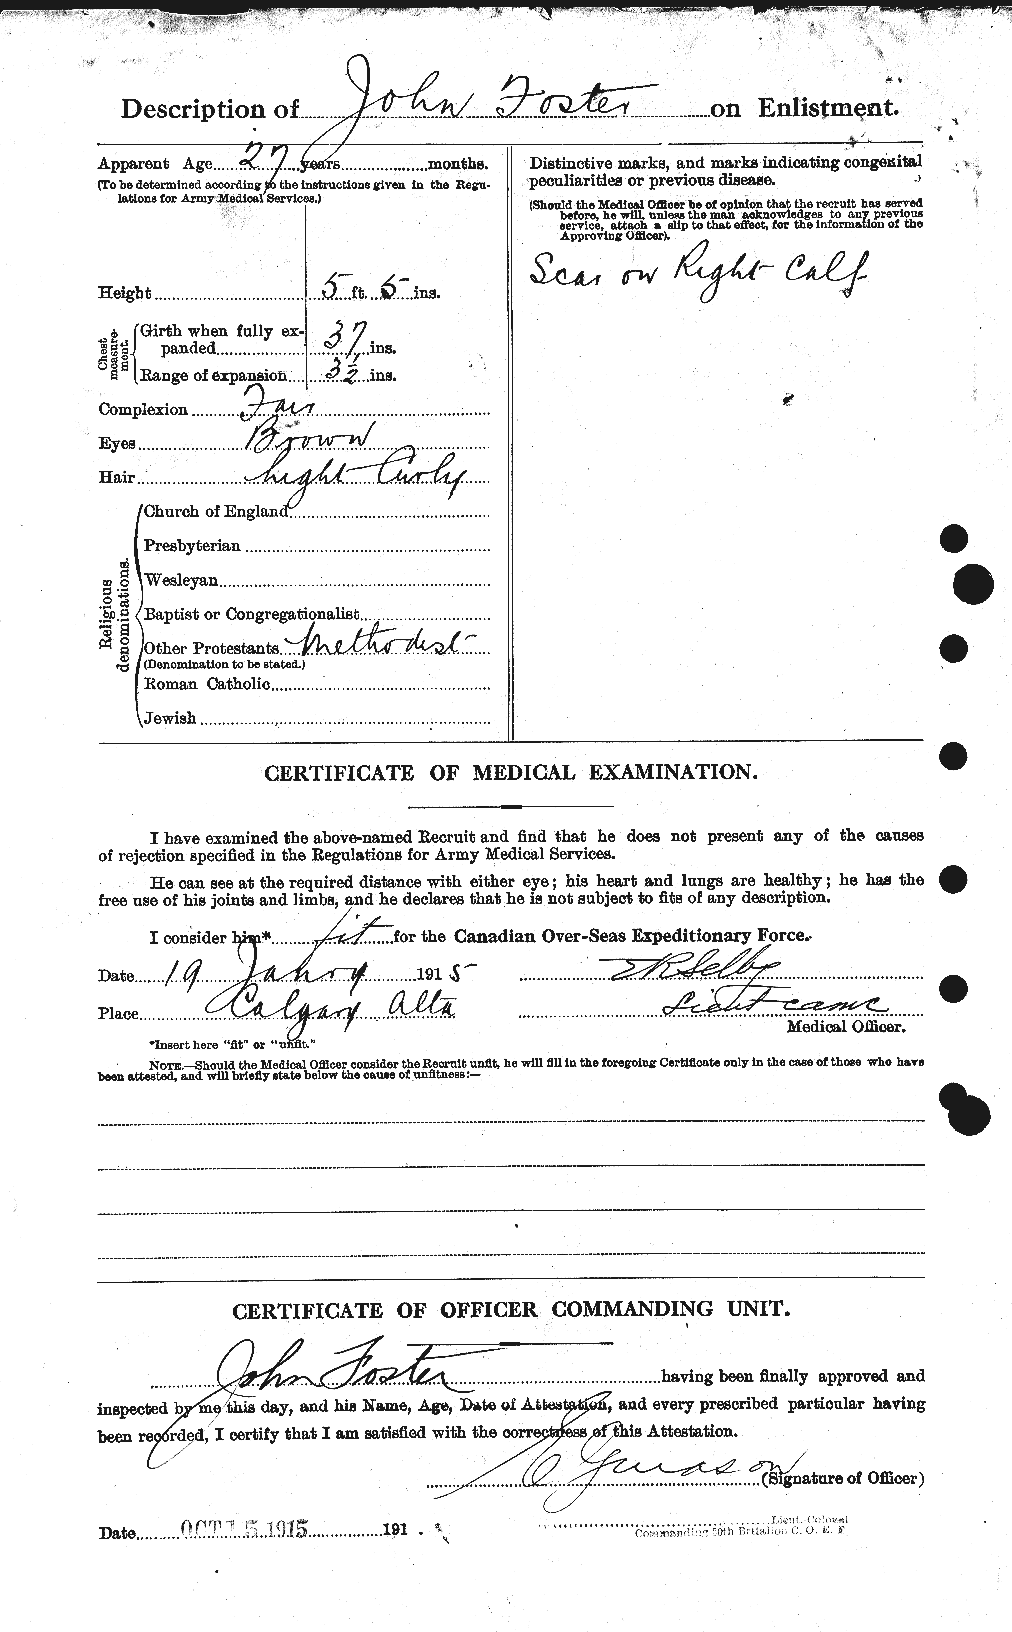 Personnel Records of the First World War - CEF 333344b